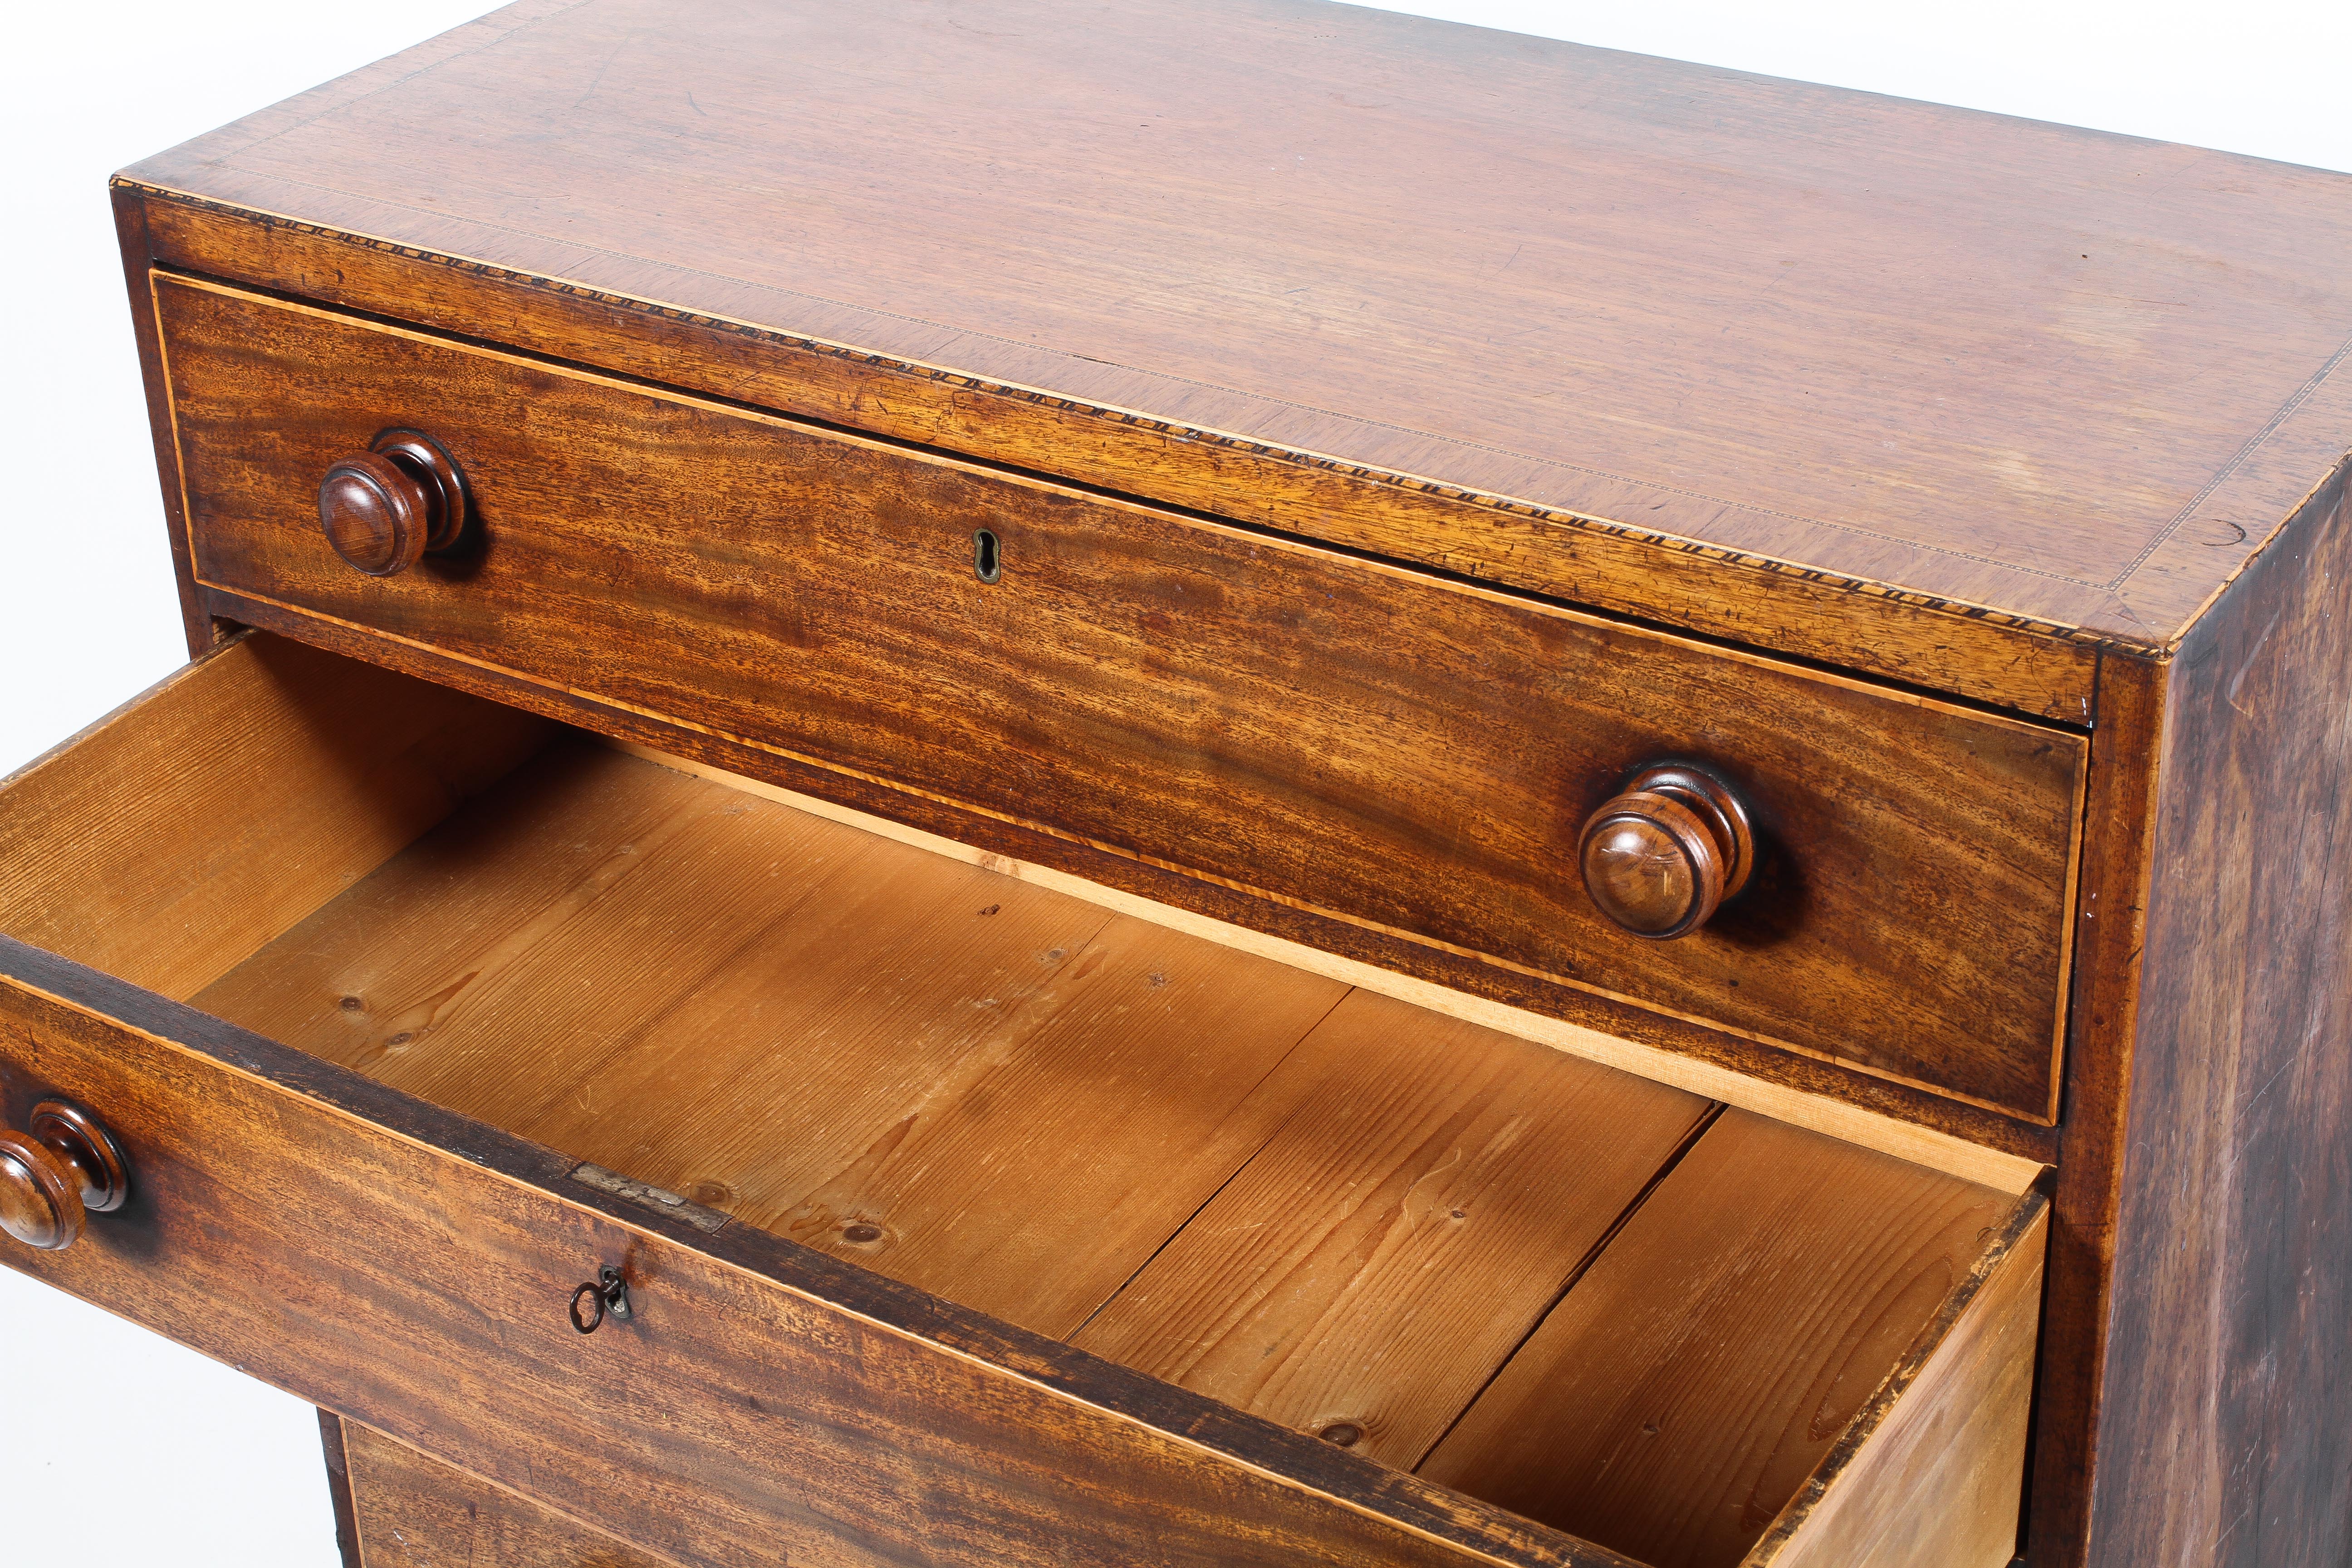 A 19th century mahogany chest of drawers, inlaid with stringing, with four graduated long drawers, - Image 2 of 3